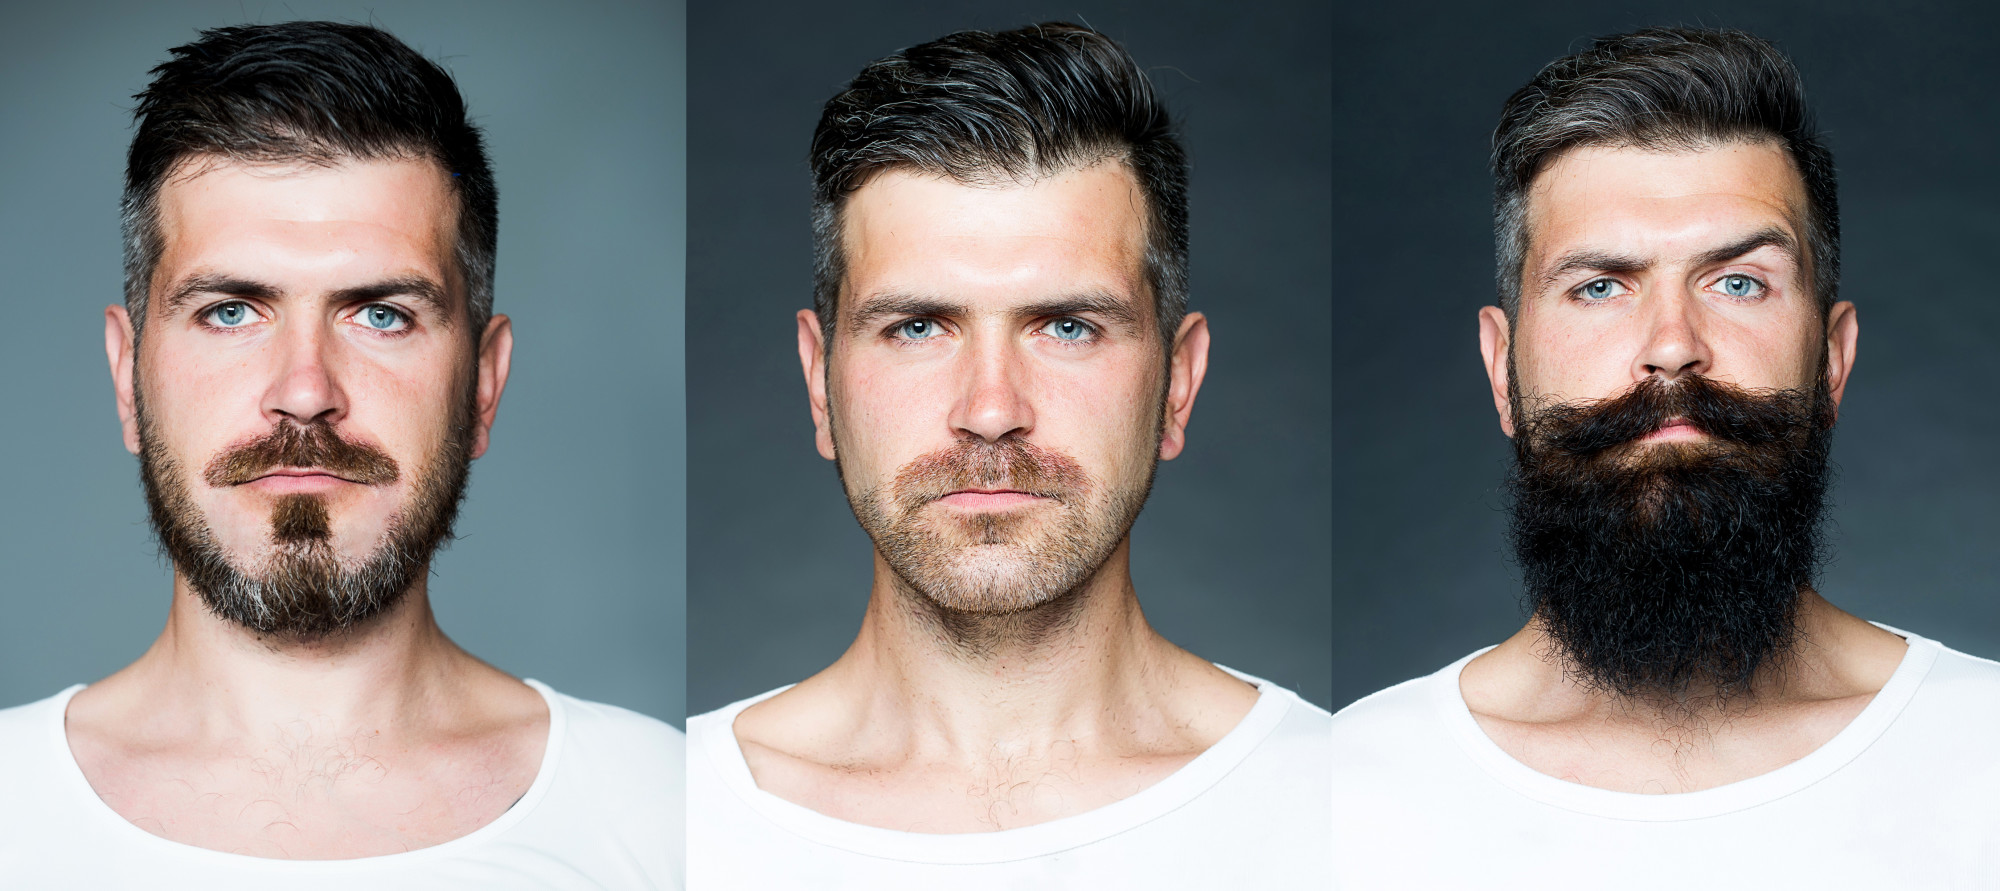 Men with different grooming styles